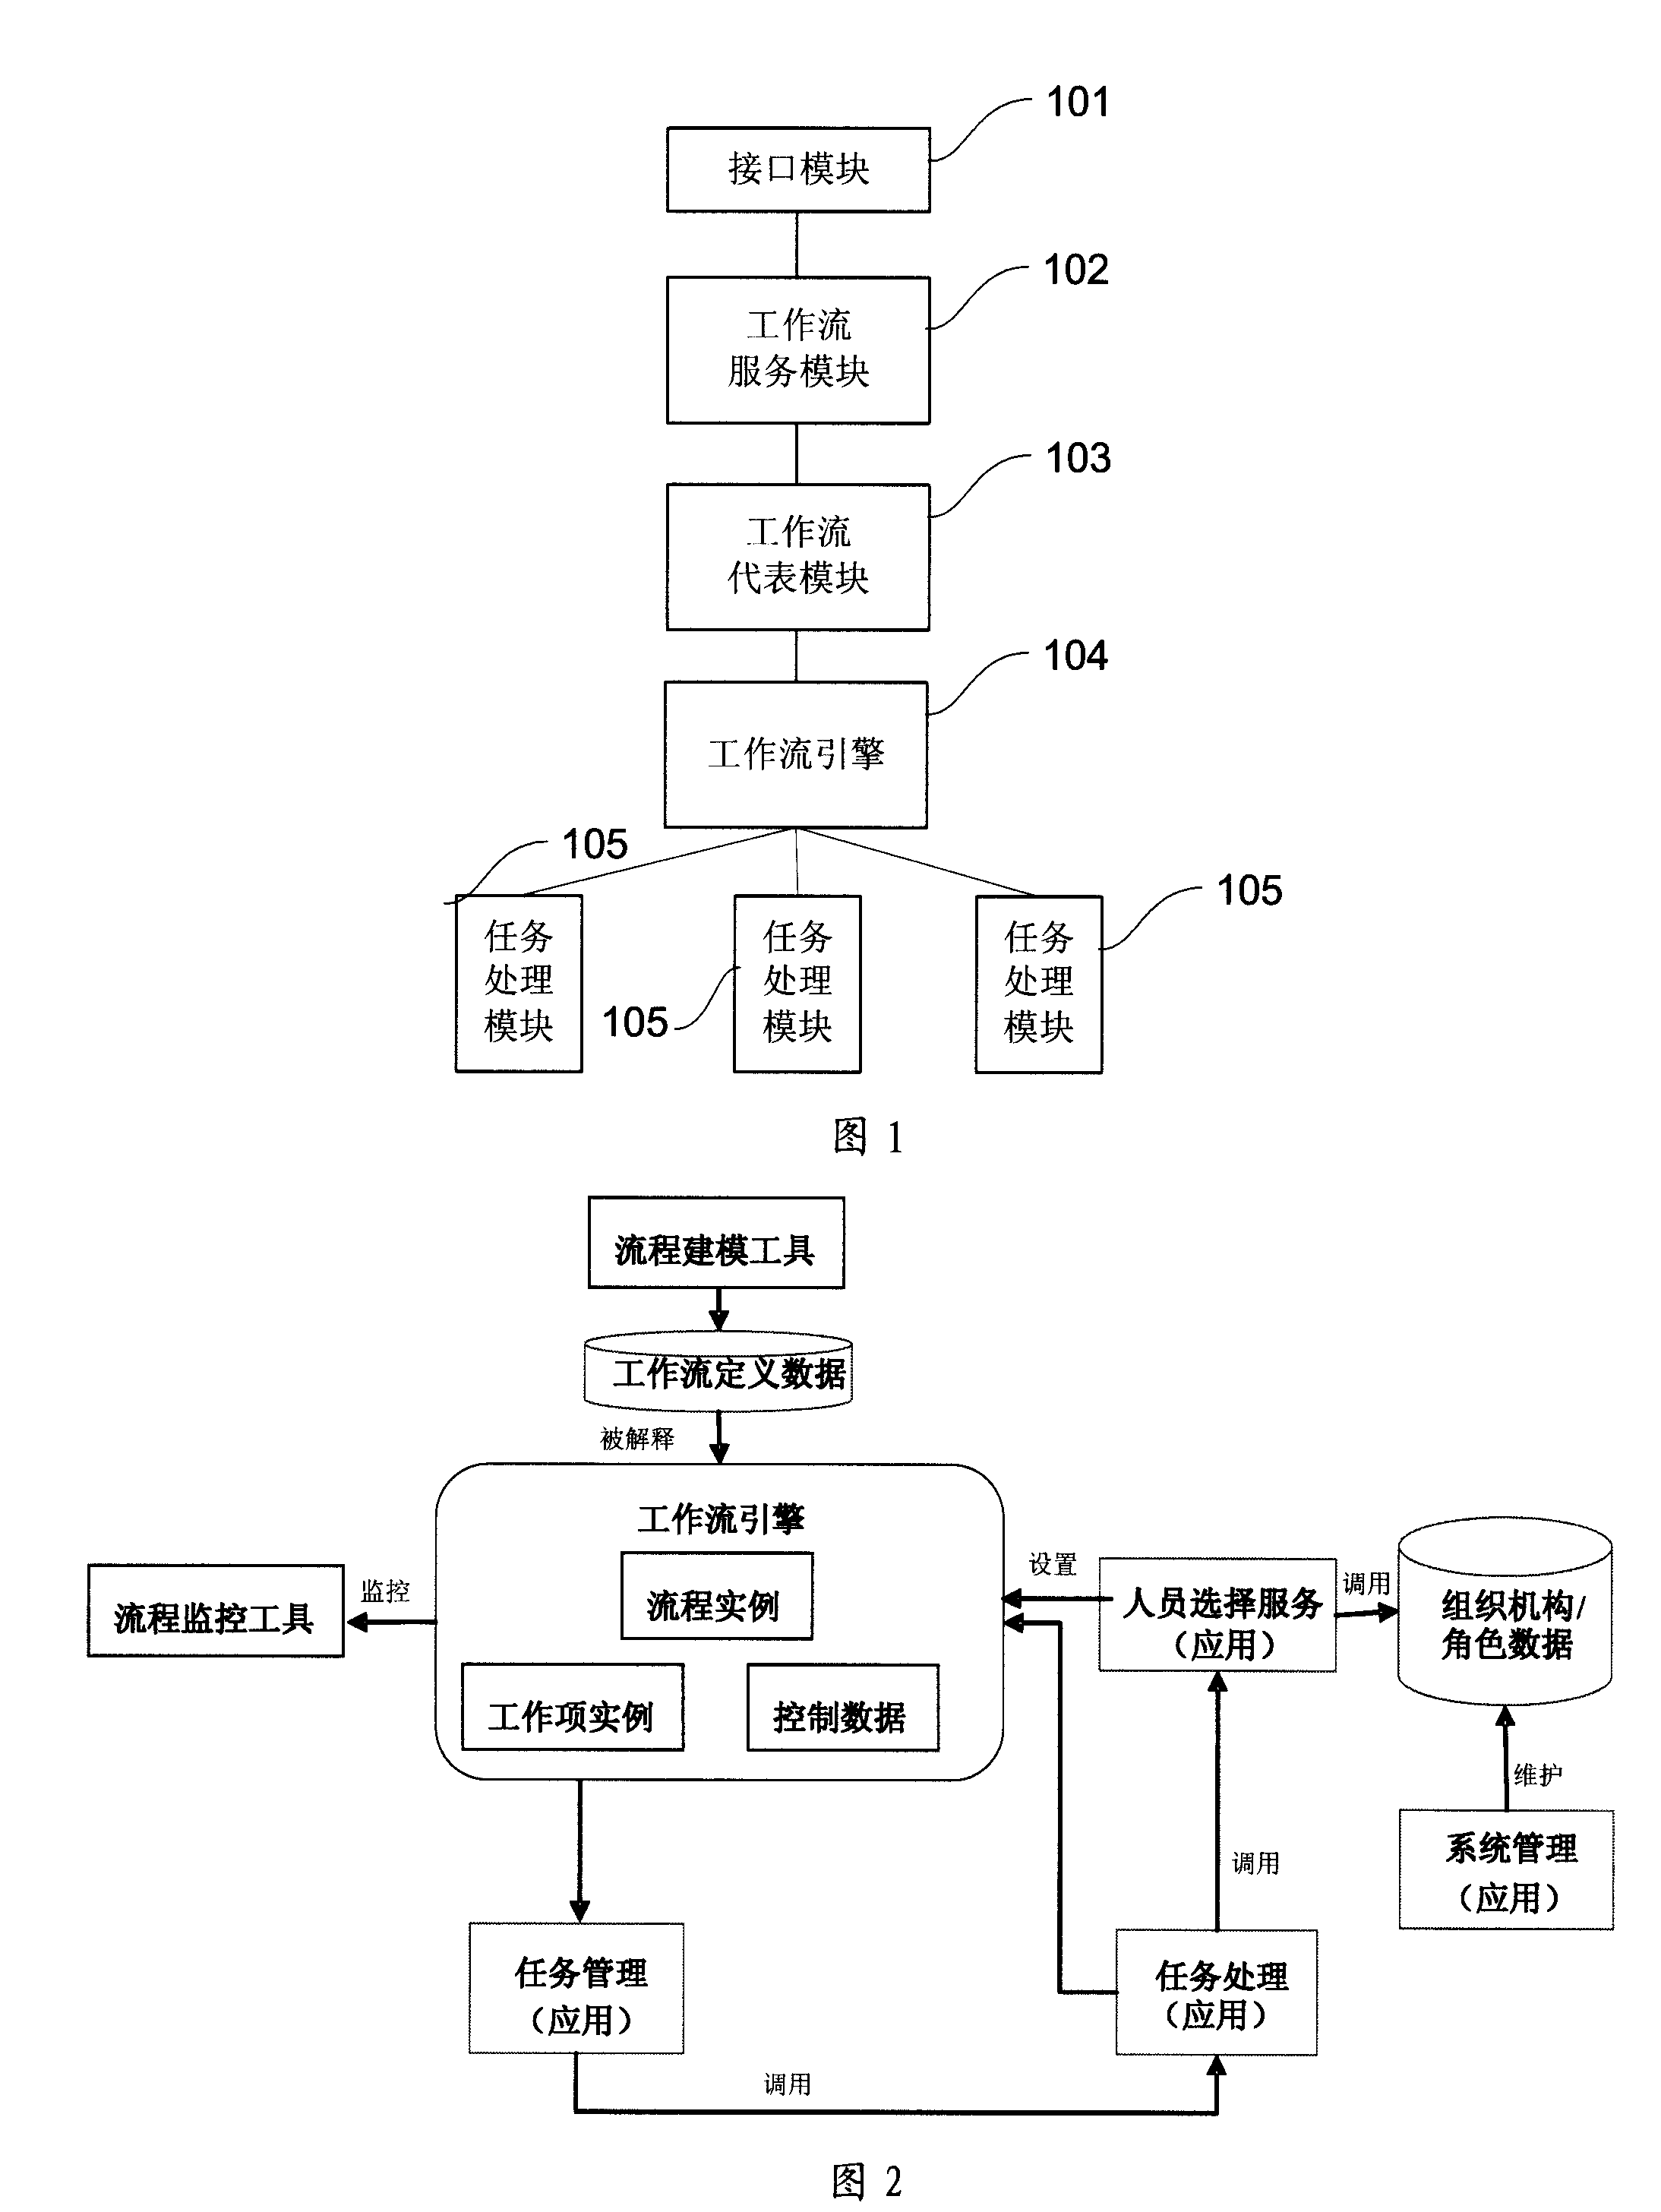 Data processing management system facing to process flow